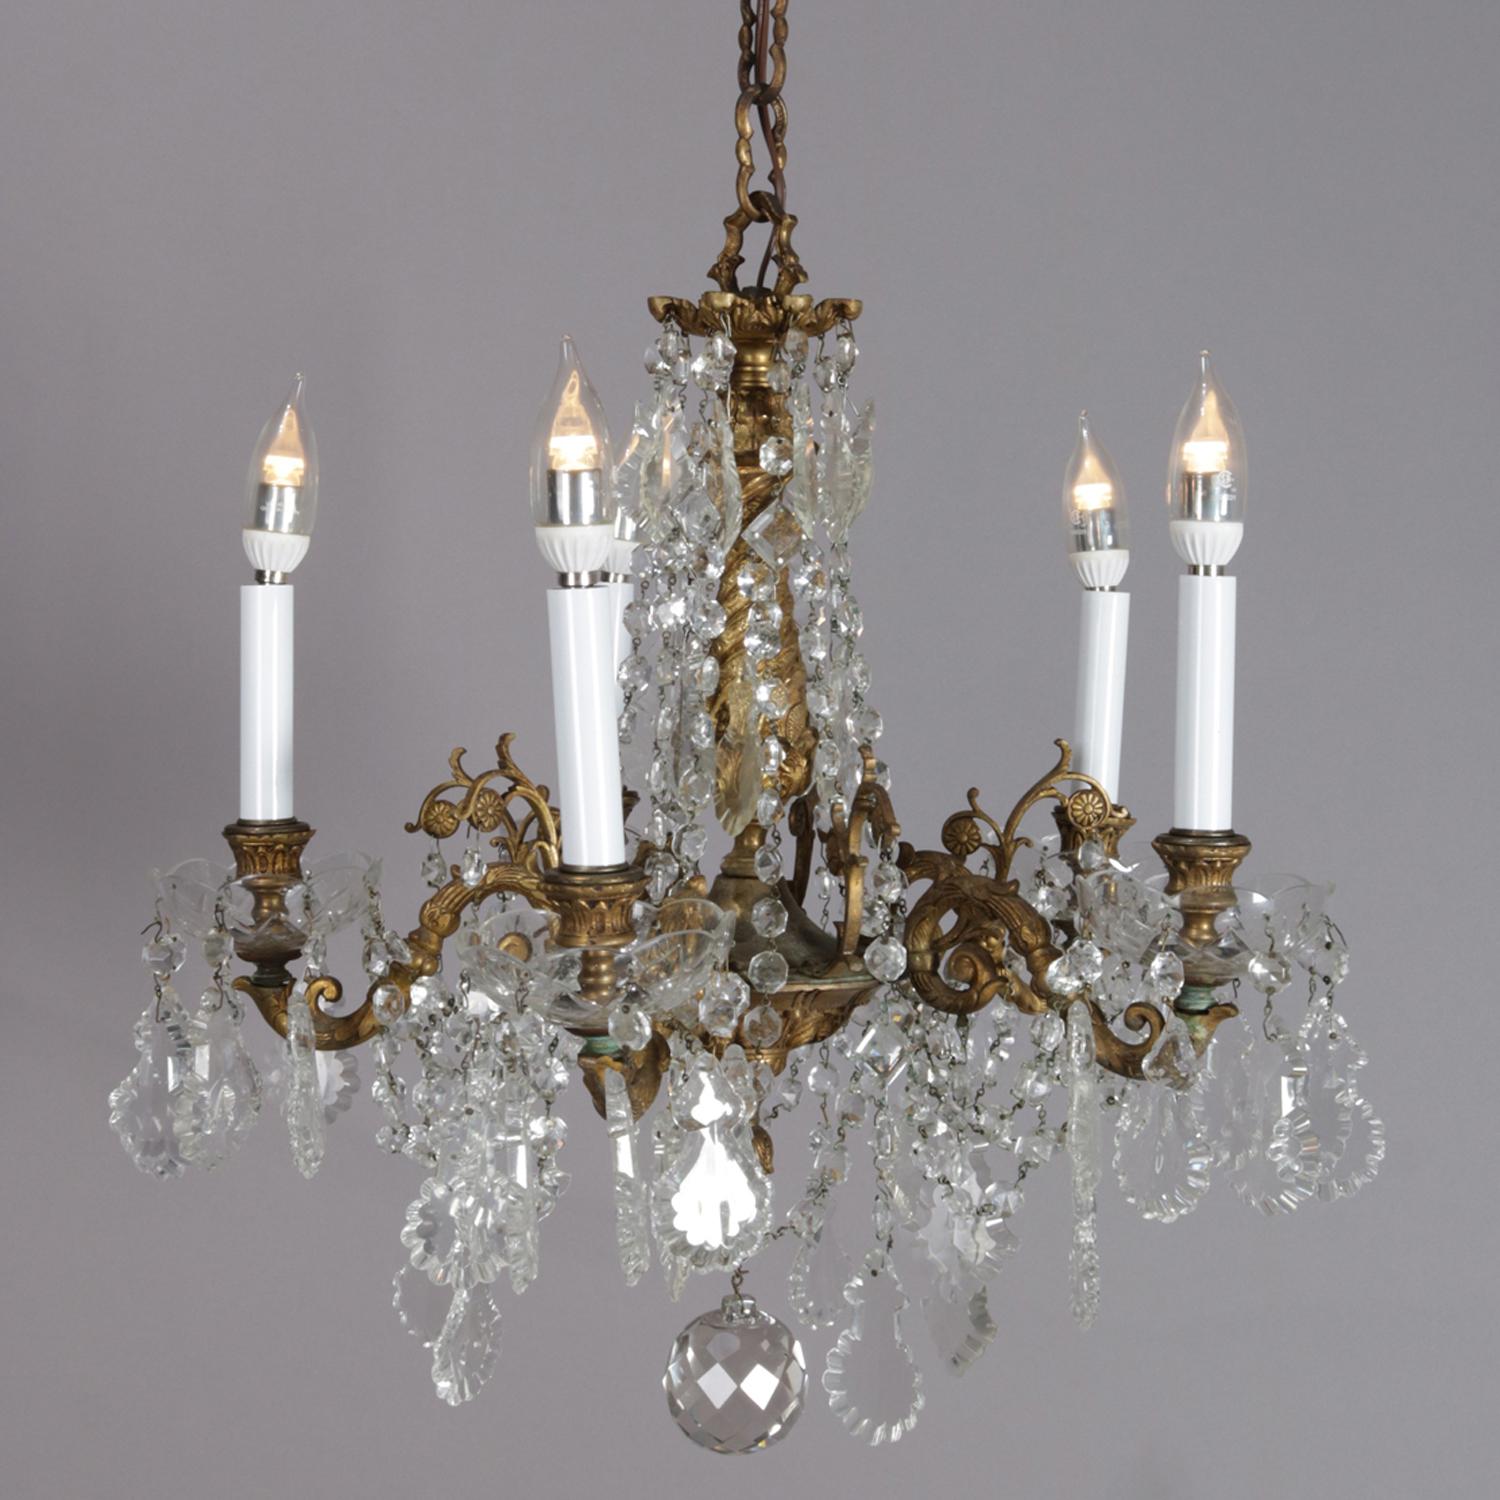 Antique French chandelier features gilt bronze frame with five scroll and foliate form arms terminating in candle lights, strung and cut crystals throughout, circa 1900. 

***DELIVERY NOTICE – Due to COVID-19 we have employed LIMITED-TO-NO-CONTACT